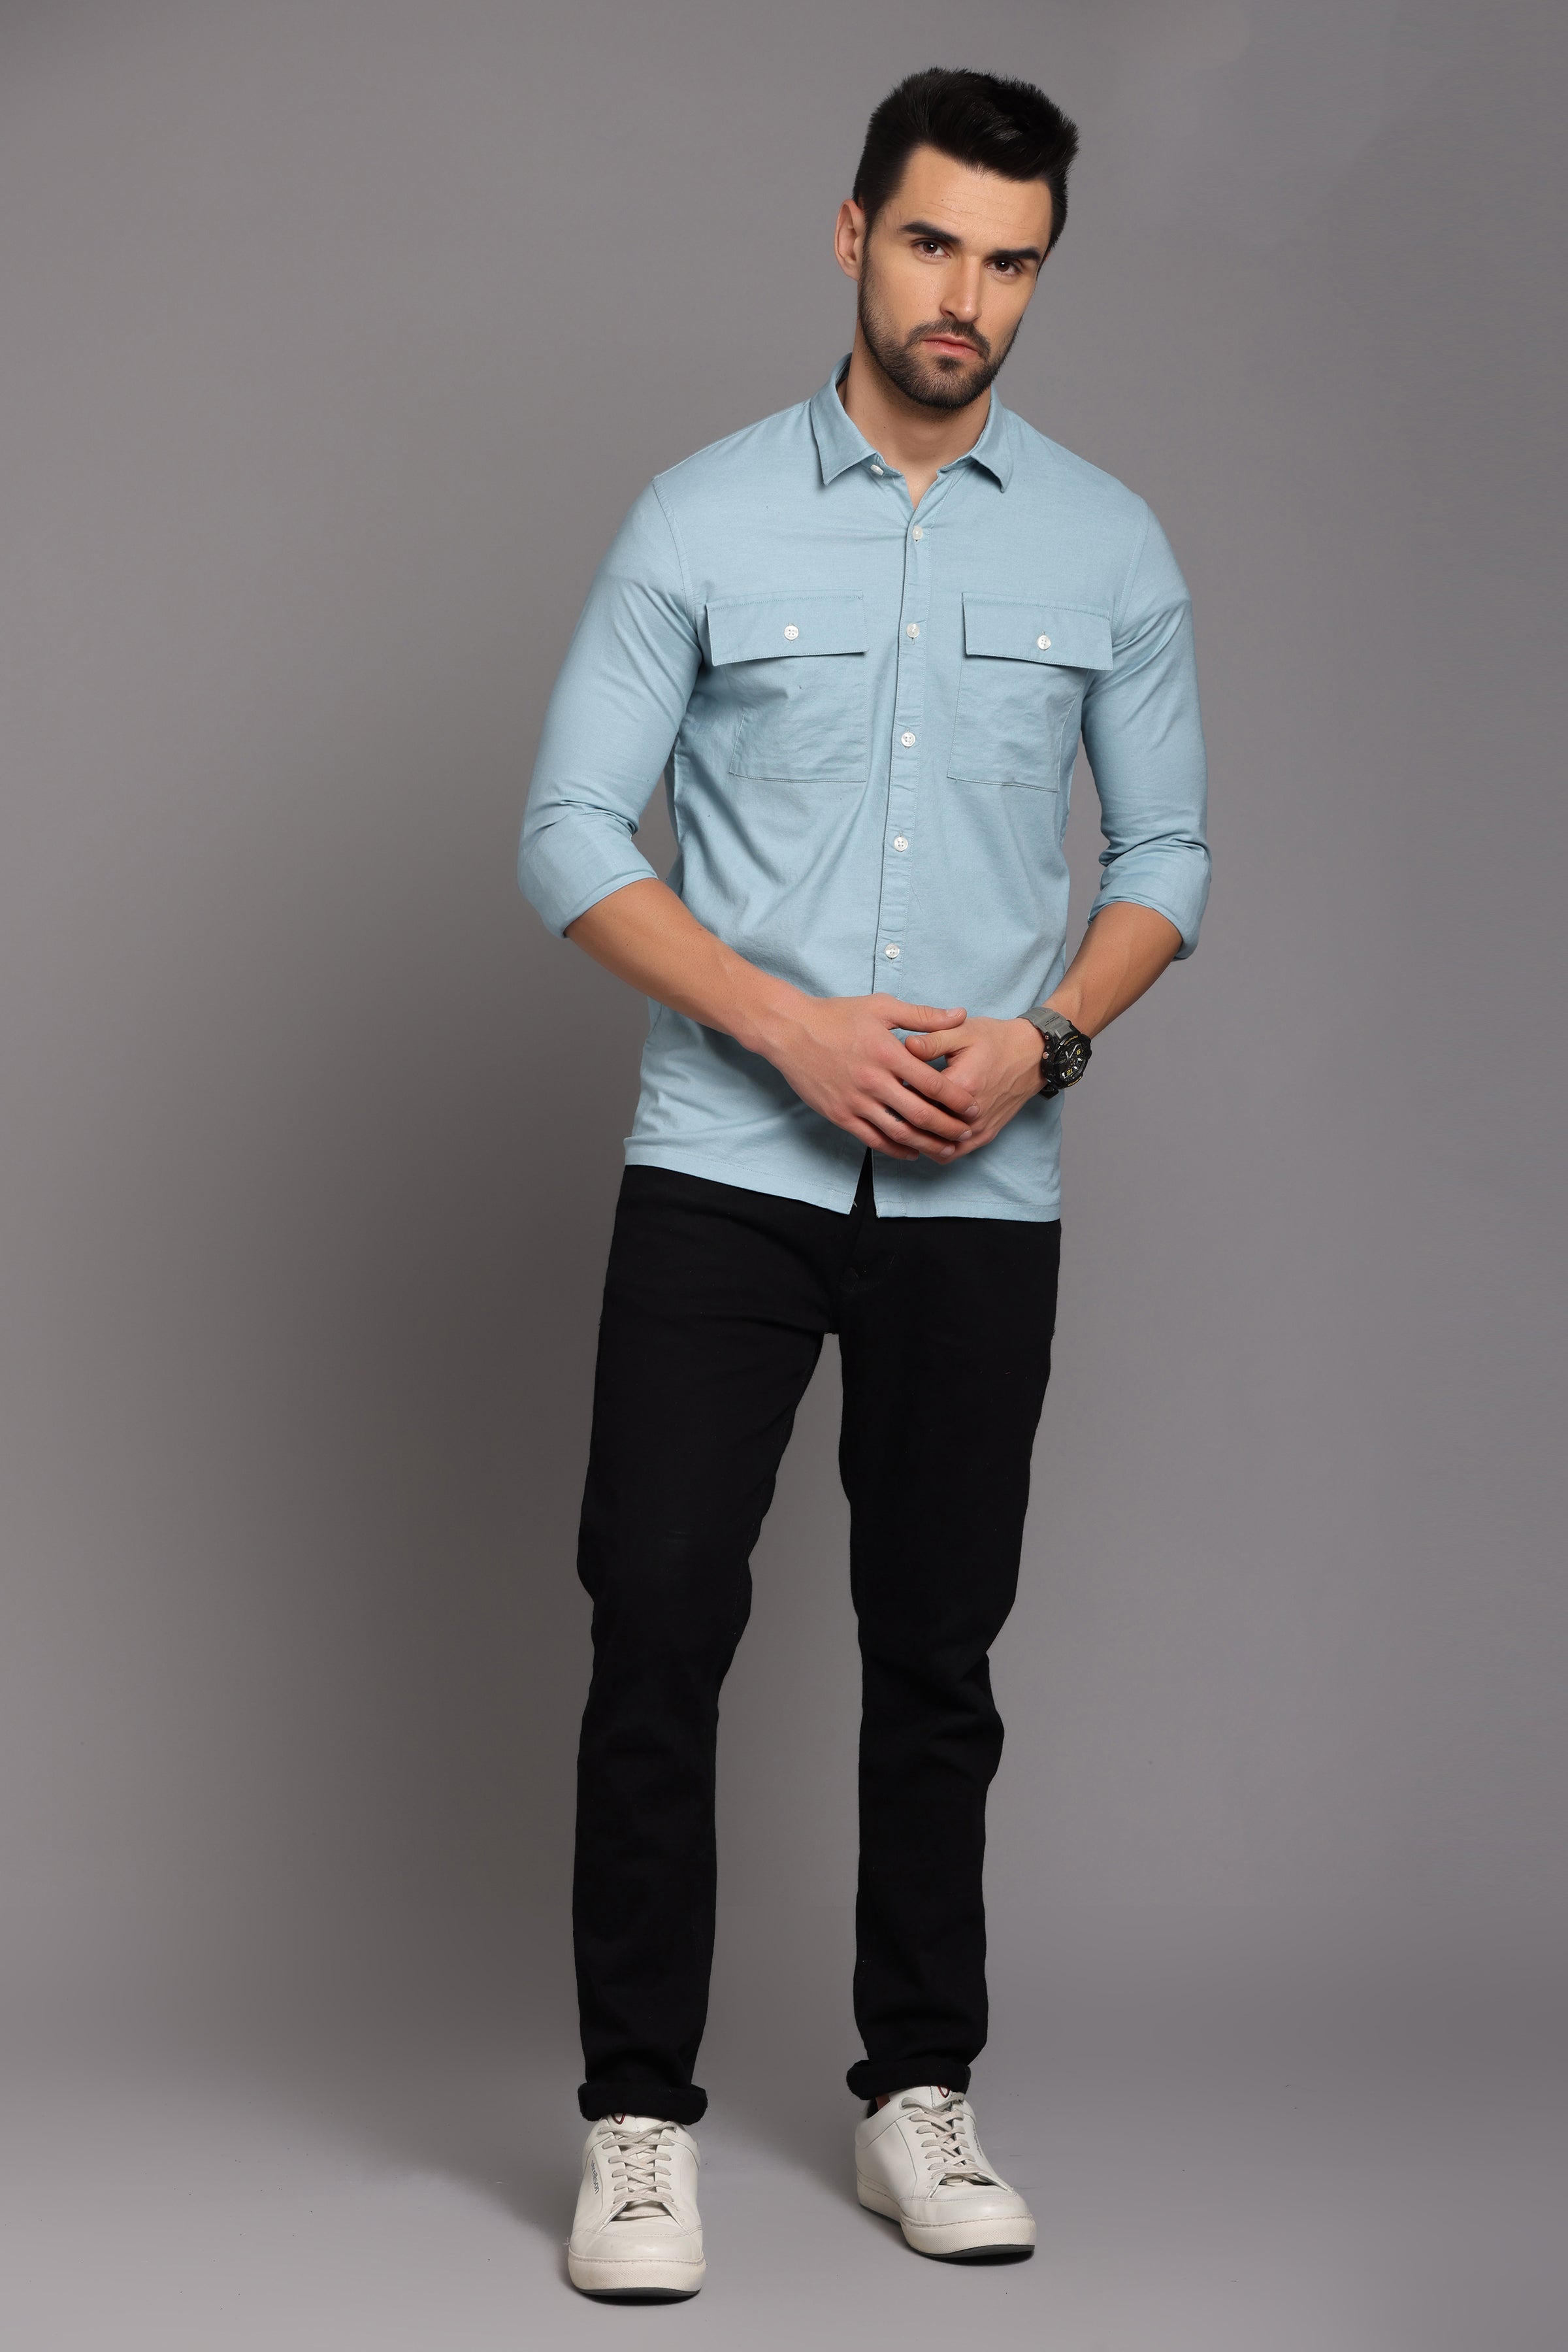 Beau Blue Full Sleeve Shirt with Double Pocket Shirts Project 30 